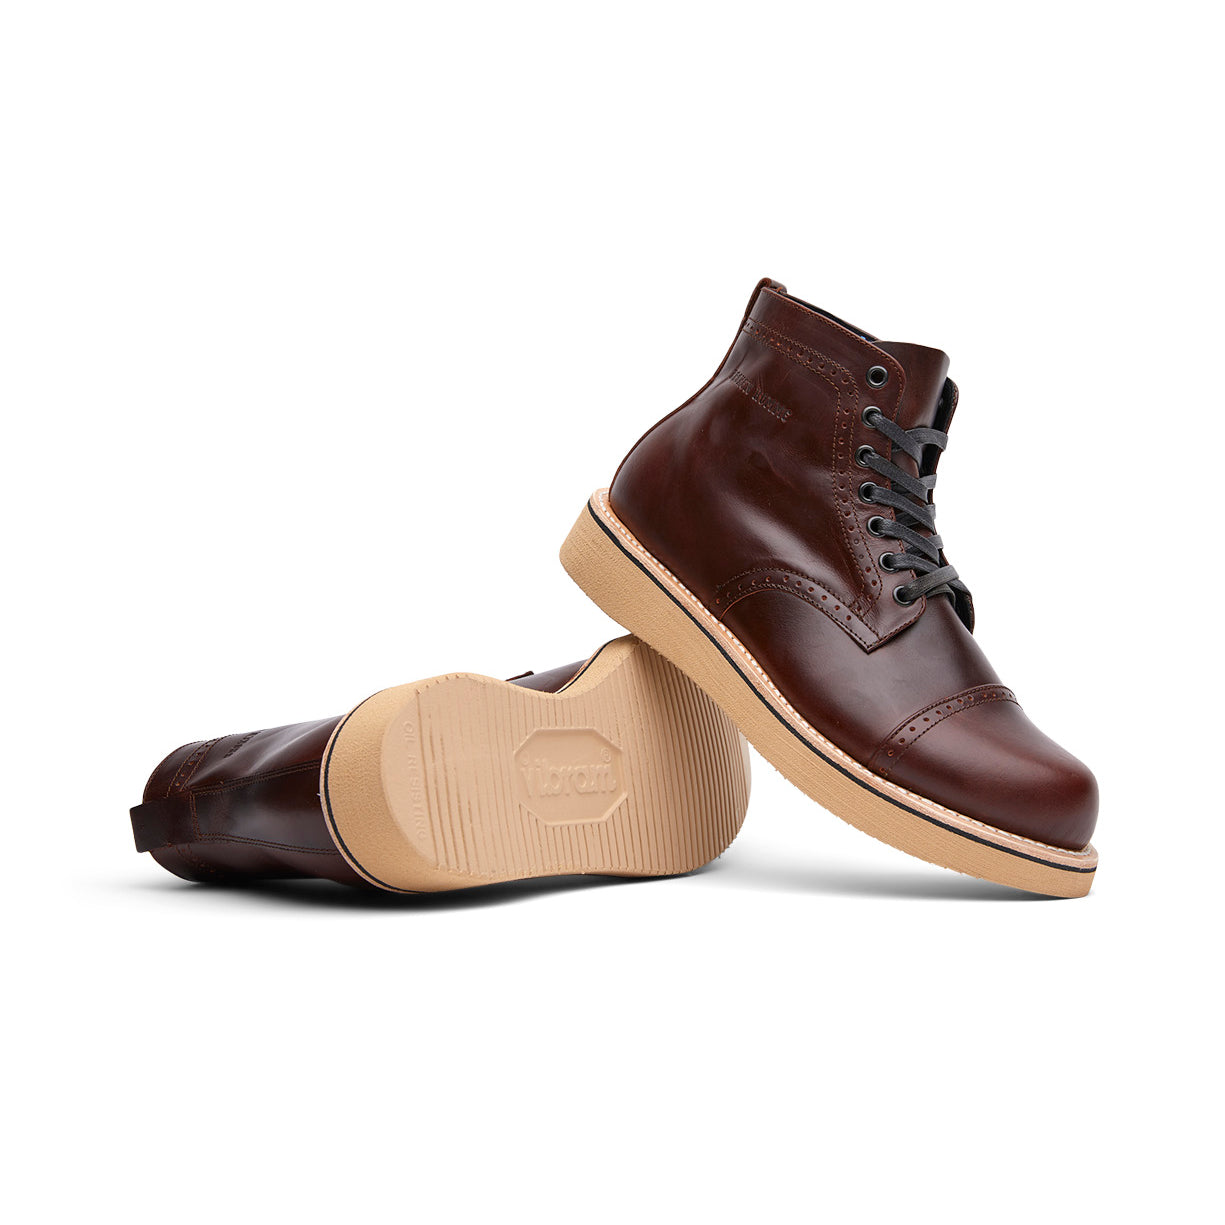 A pair of Shaun brown leather boots with a goodyear welt by Broken Homme on a white background.